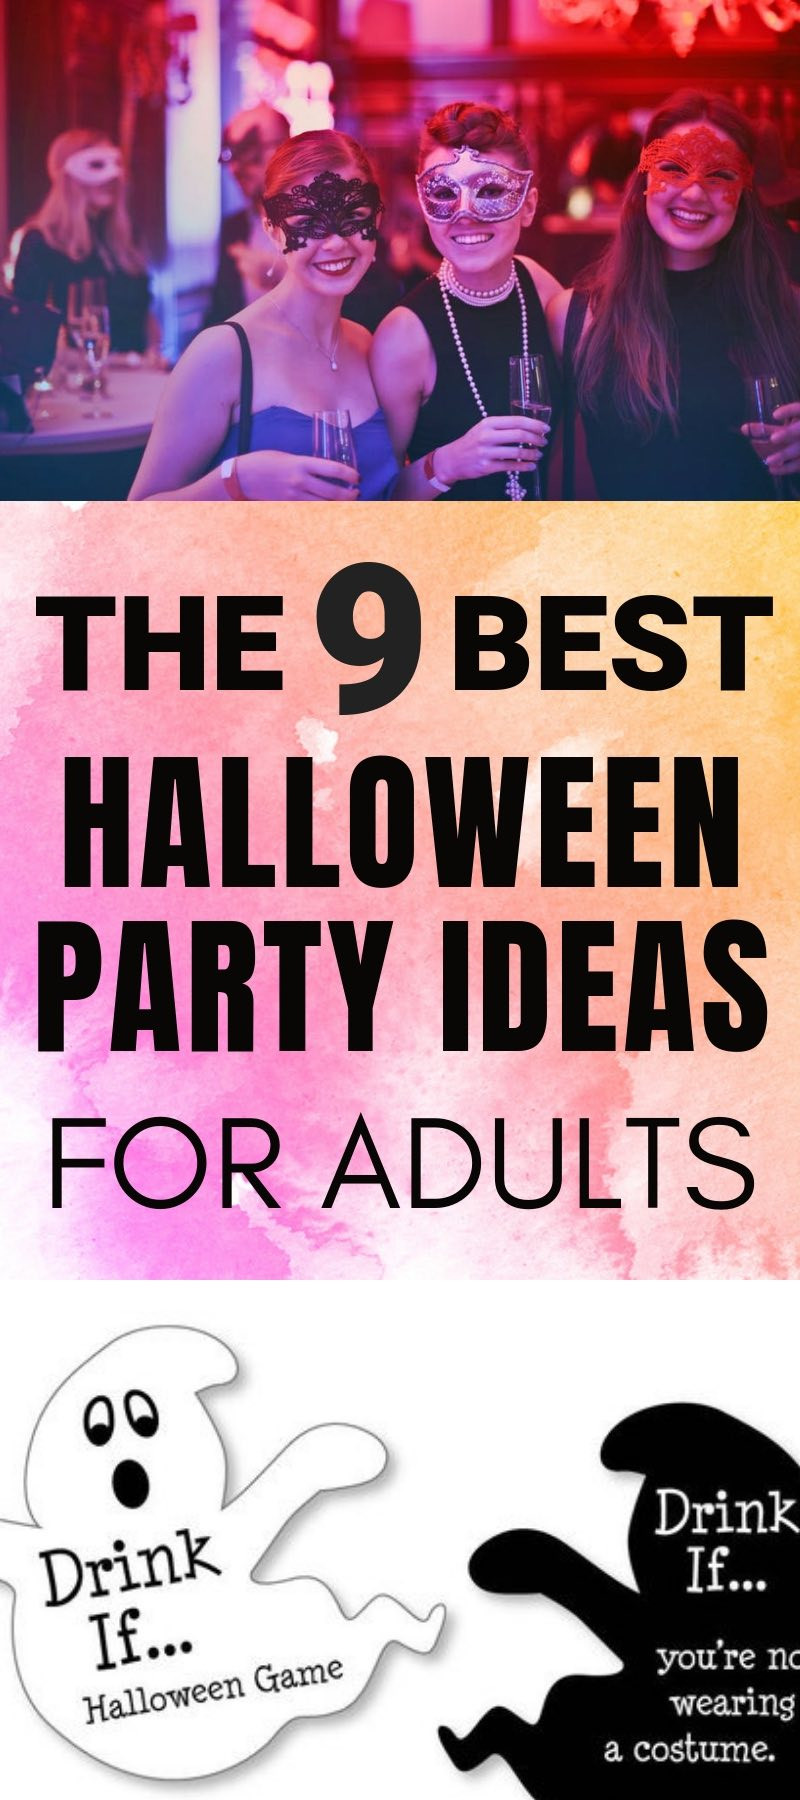 Game Ideas For Halloween Party For Adults
 9 Best Halloween Party Games for Adults that are Free or Cheap